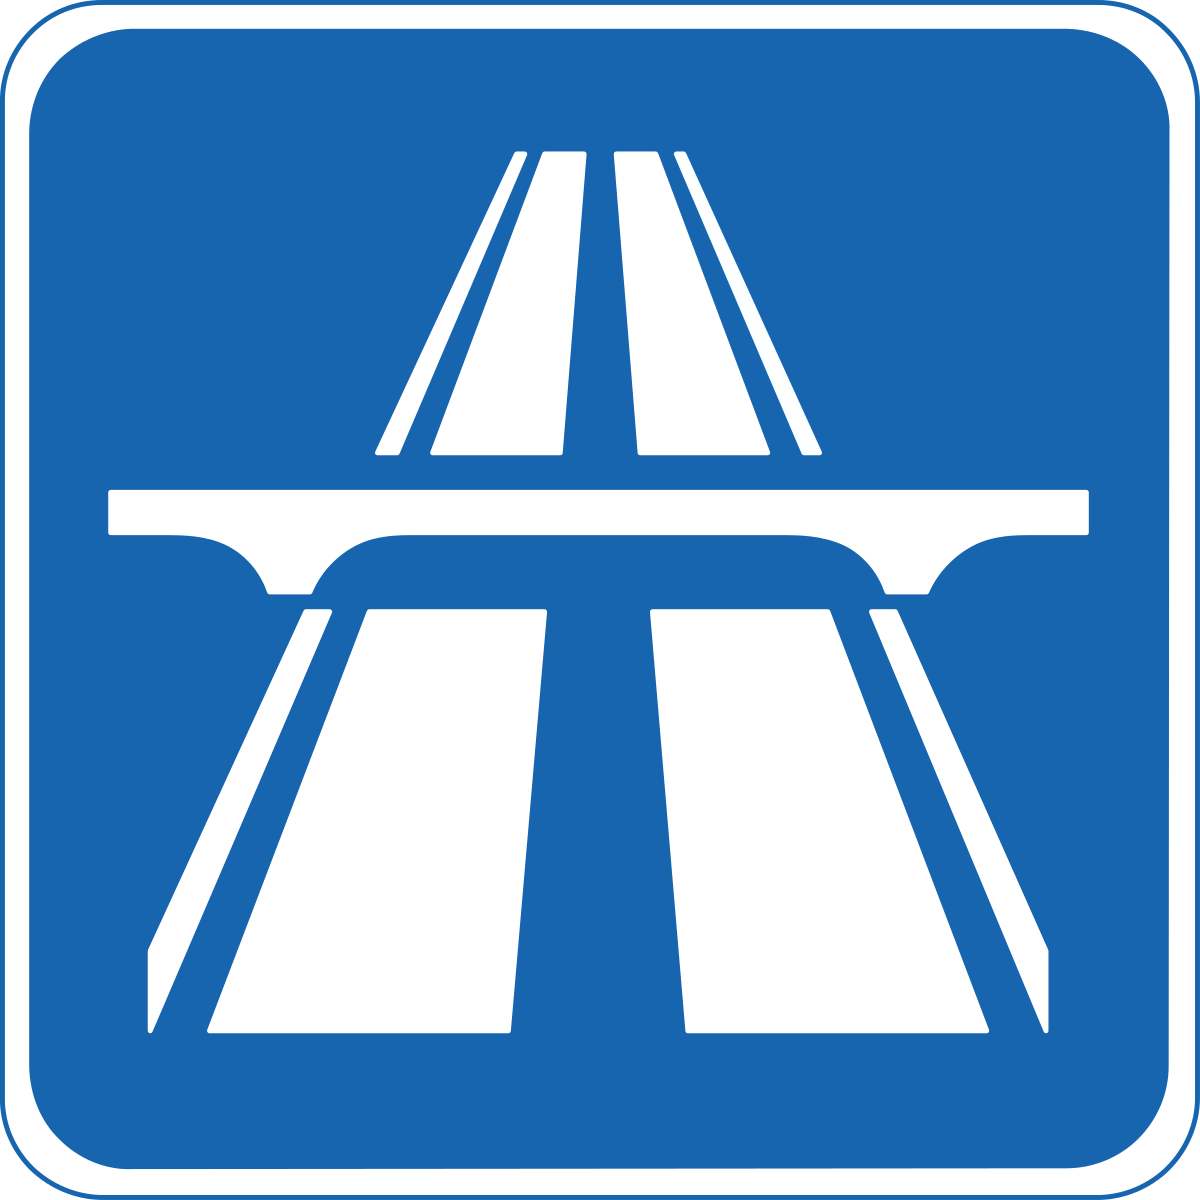 Start of Expressway and point from which expressway regulations apply